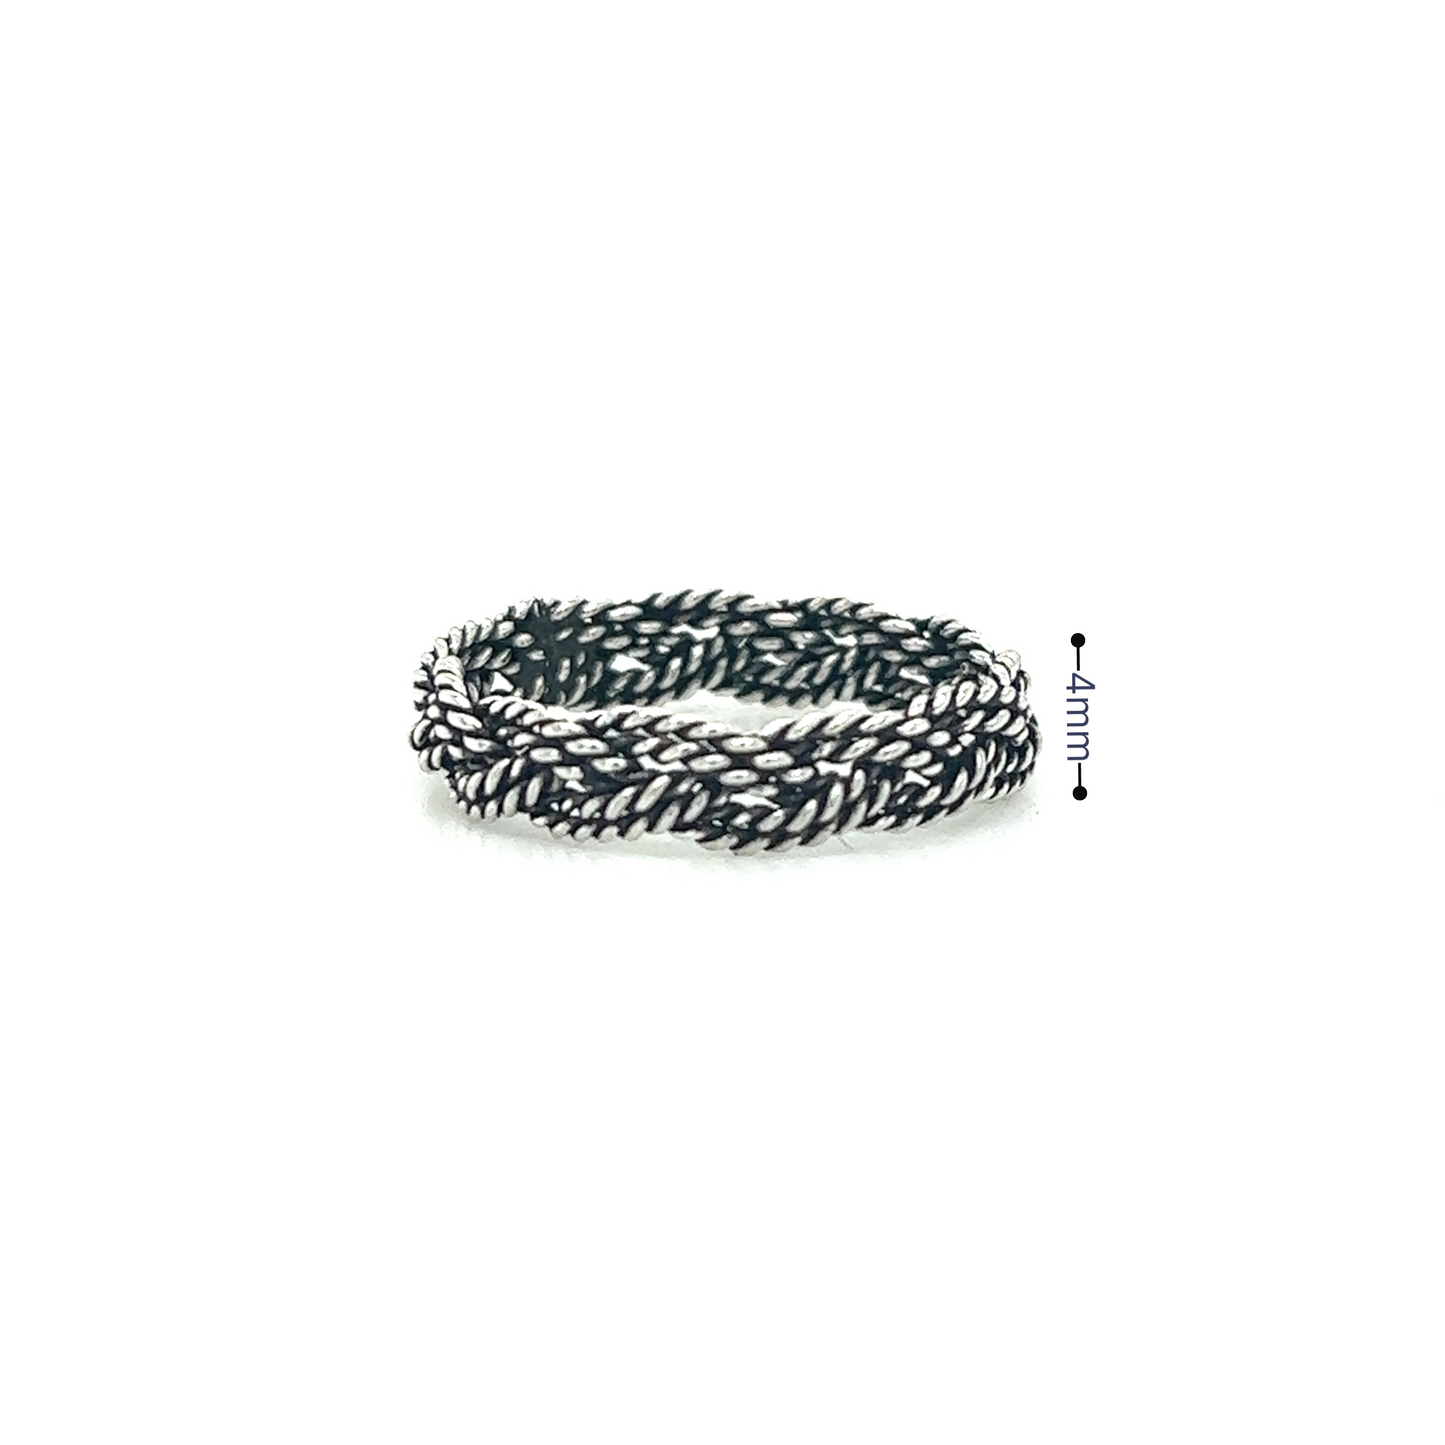 An artisanal craftsmanship showcasing a Super Silver Twisted Rope Band Ring on a white surface, featuring a dark oxidized finish.